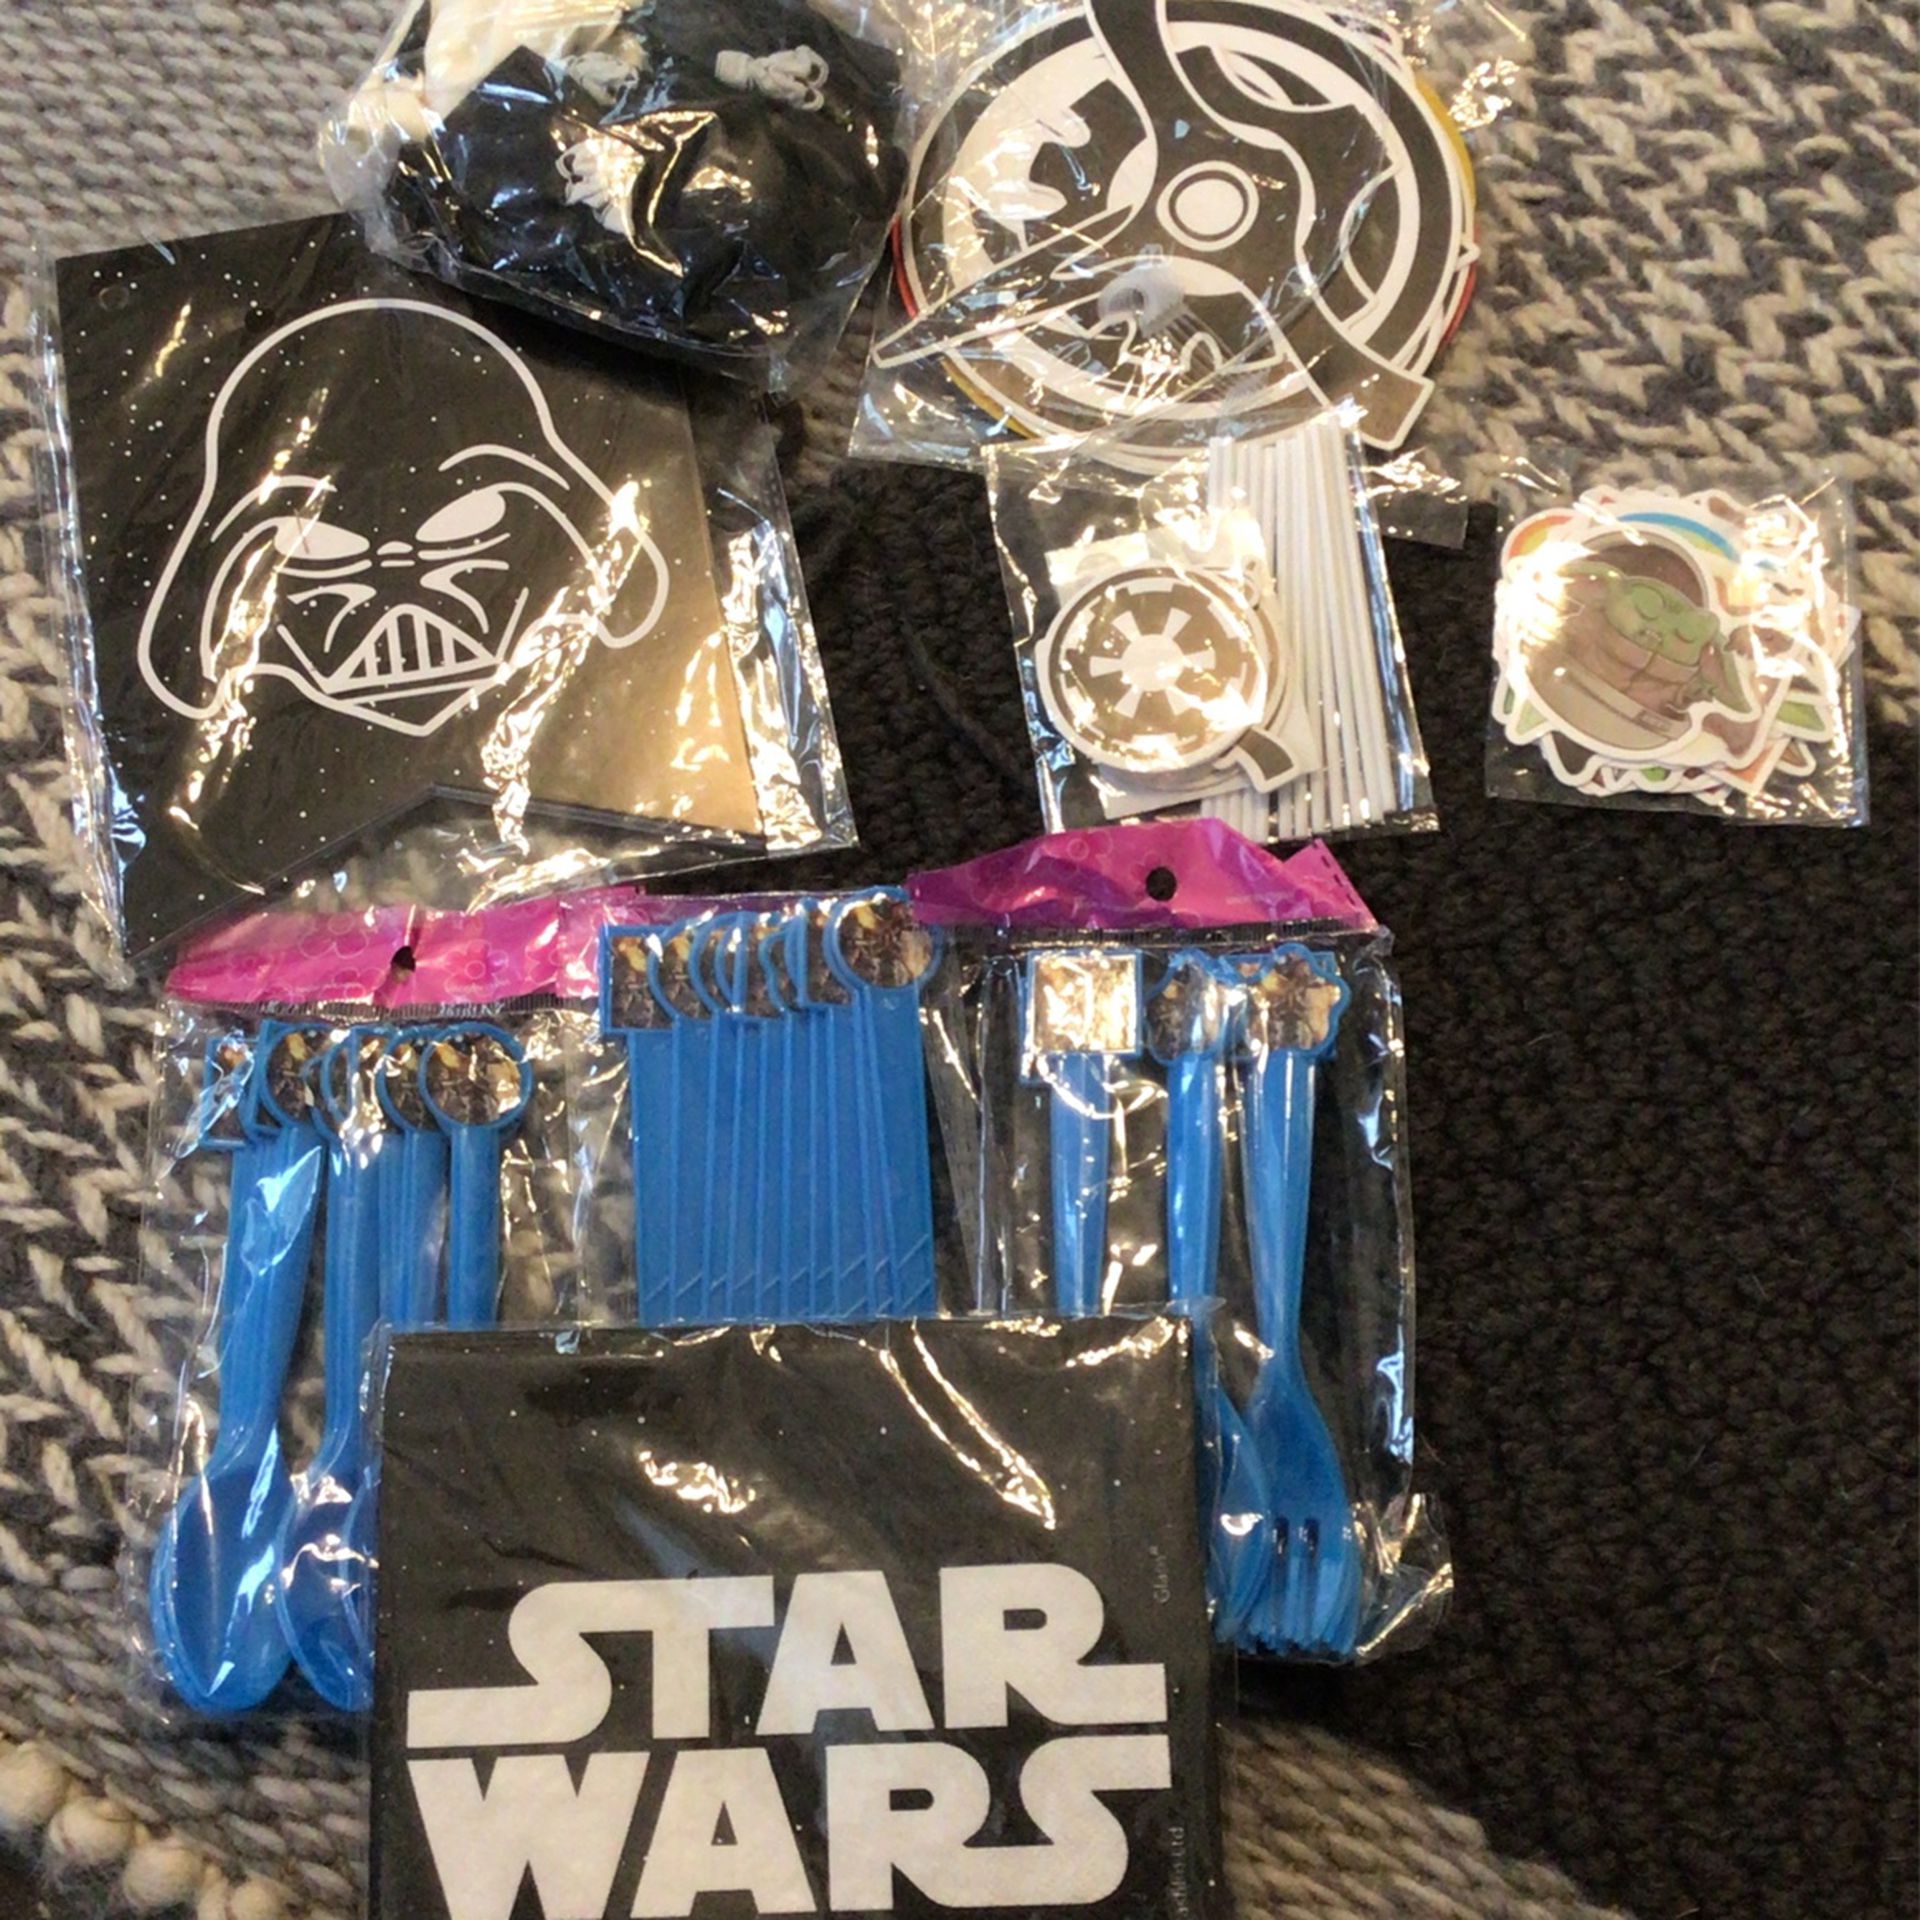 Star Wars Party Decorations 